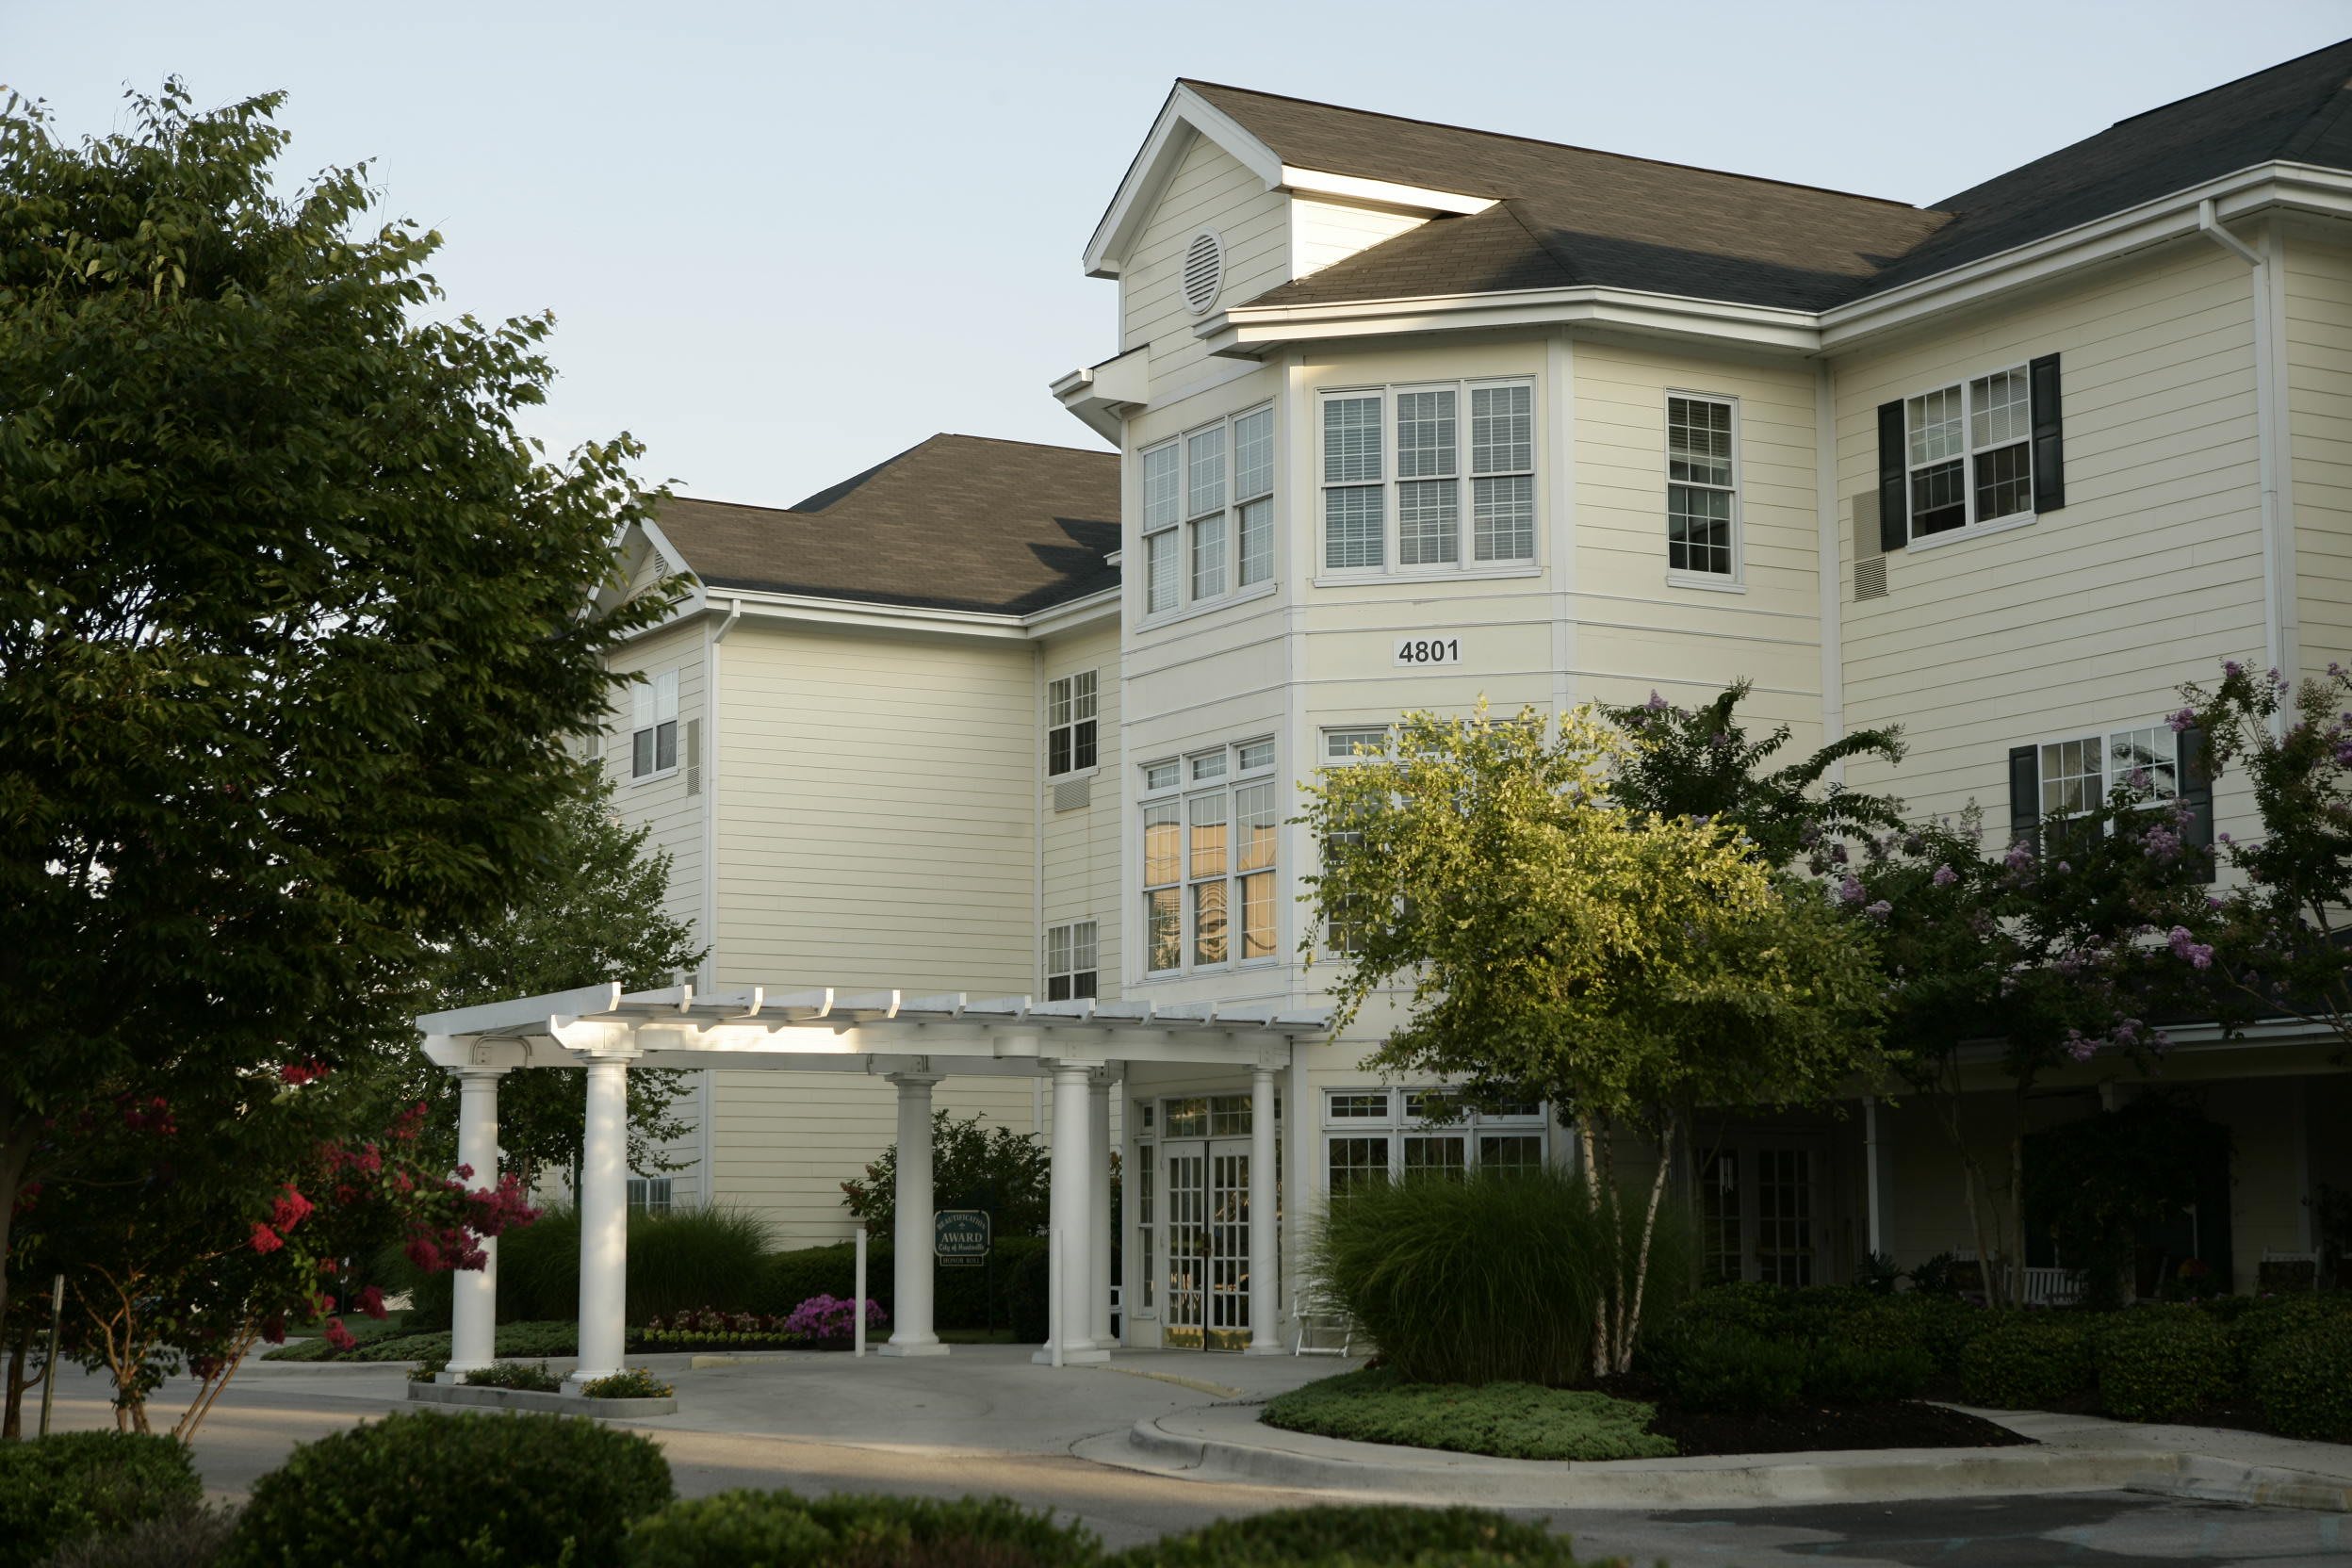 Lynridge of Huntsville Assisted Living and Memory Care community entrance